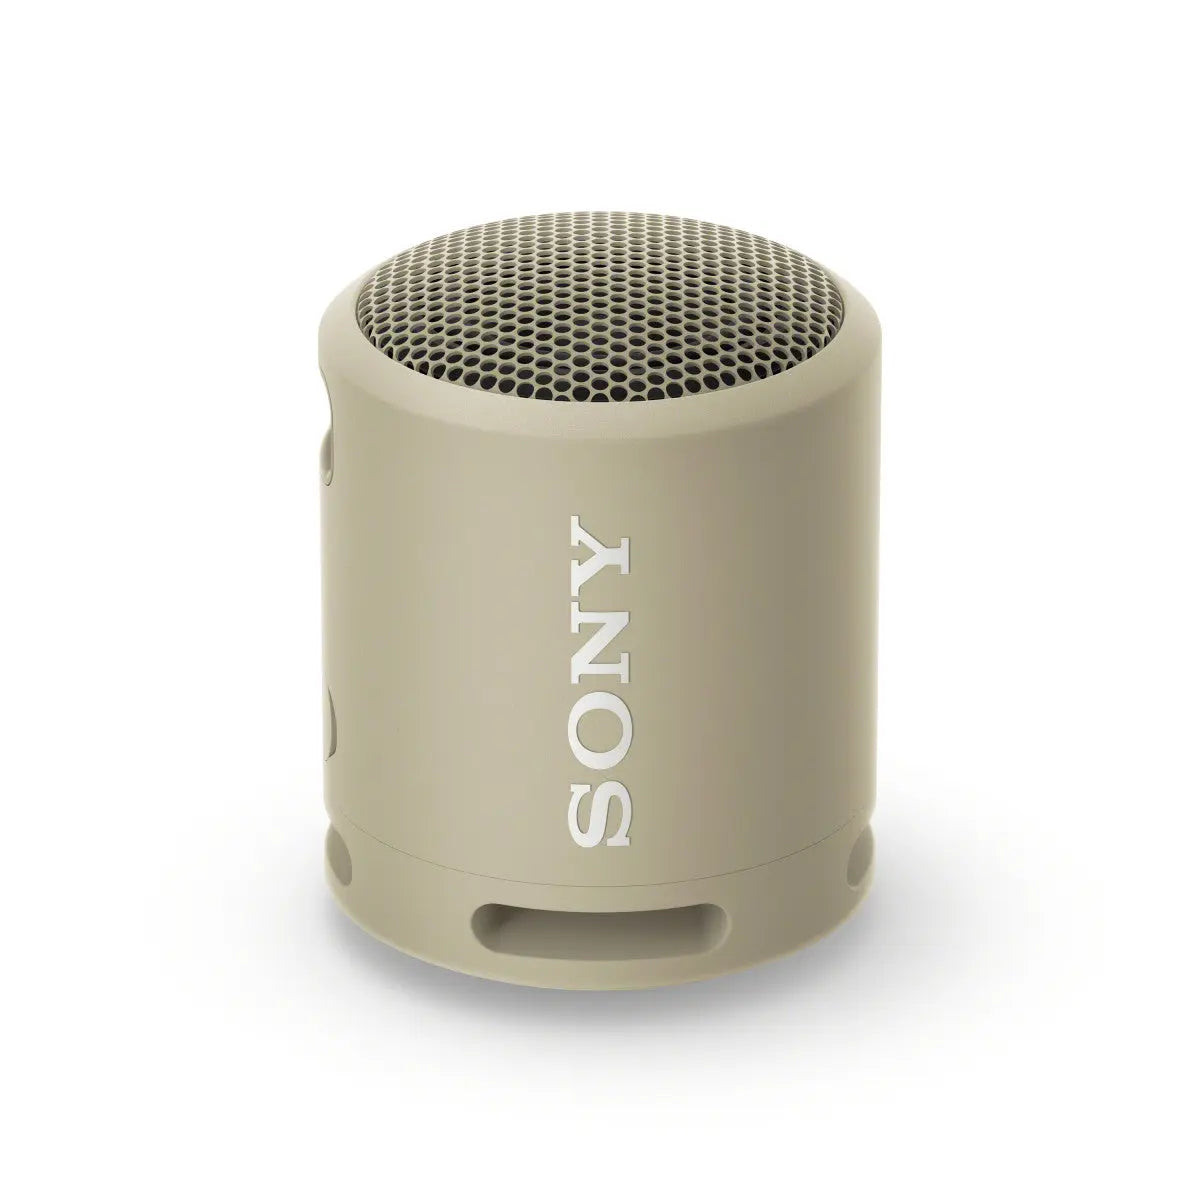 Sony SRS-XB13 - Compact & Portable Waterproof Wireless Bluetooth® speaker with EXTRA BASS Sony